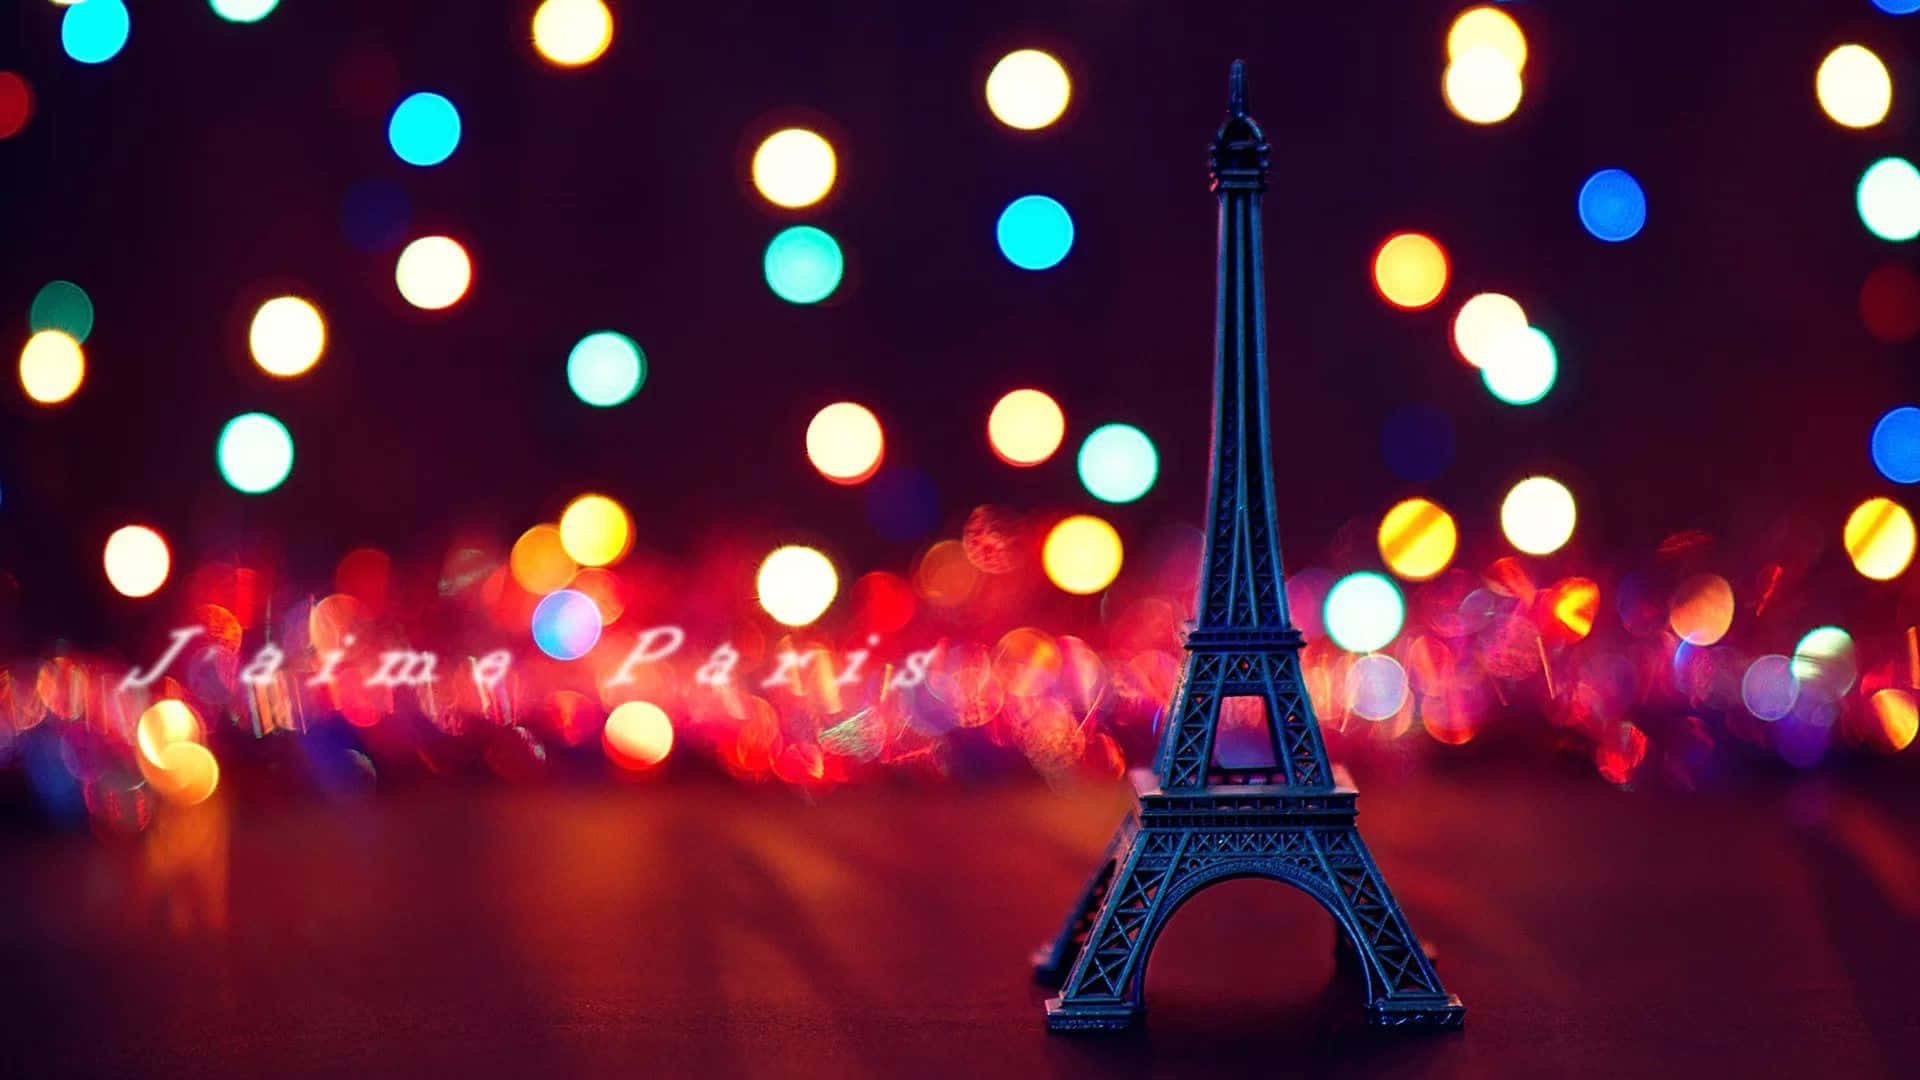 Share the Love - Paris Style Wallpaper